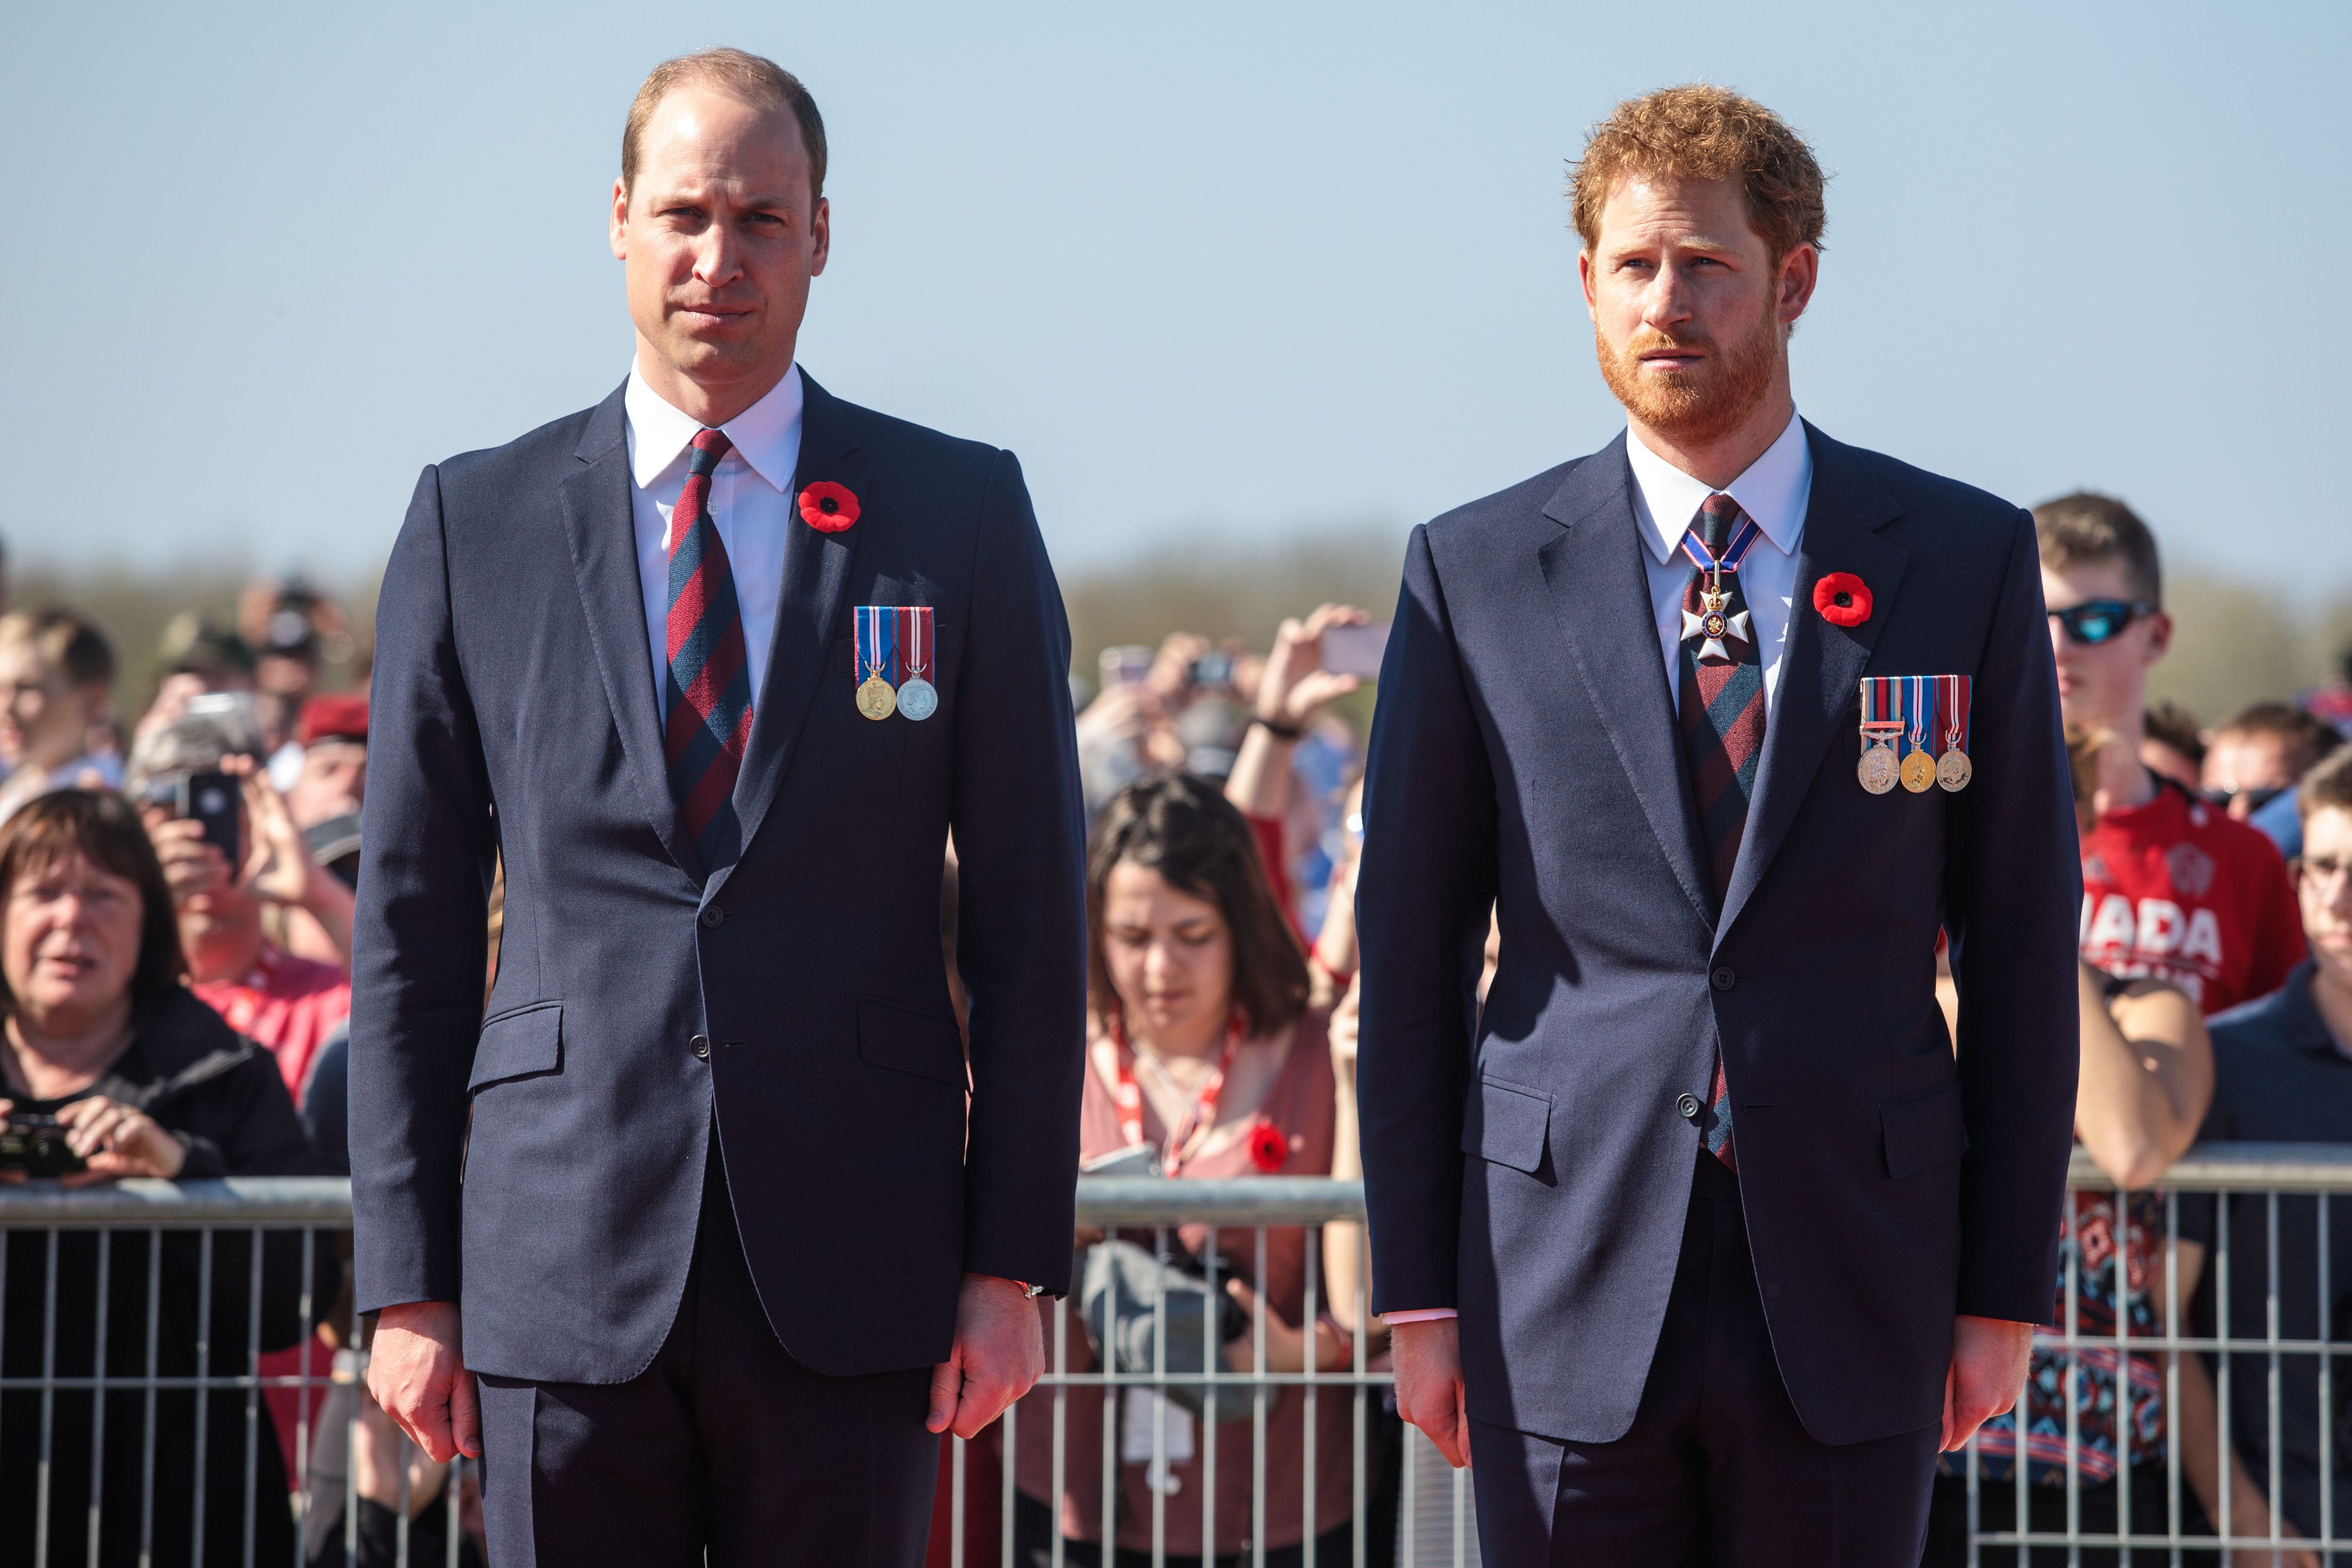 Prince William and Prince Harry at the Canadian National Vimy Memorial on April 9, 2017 in Vimy, France | Photo: Getty Images